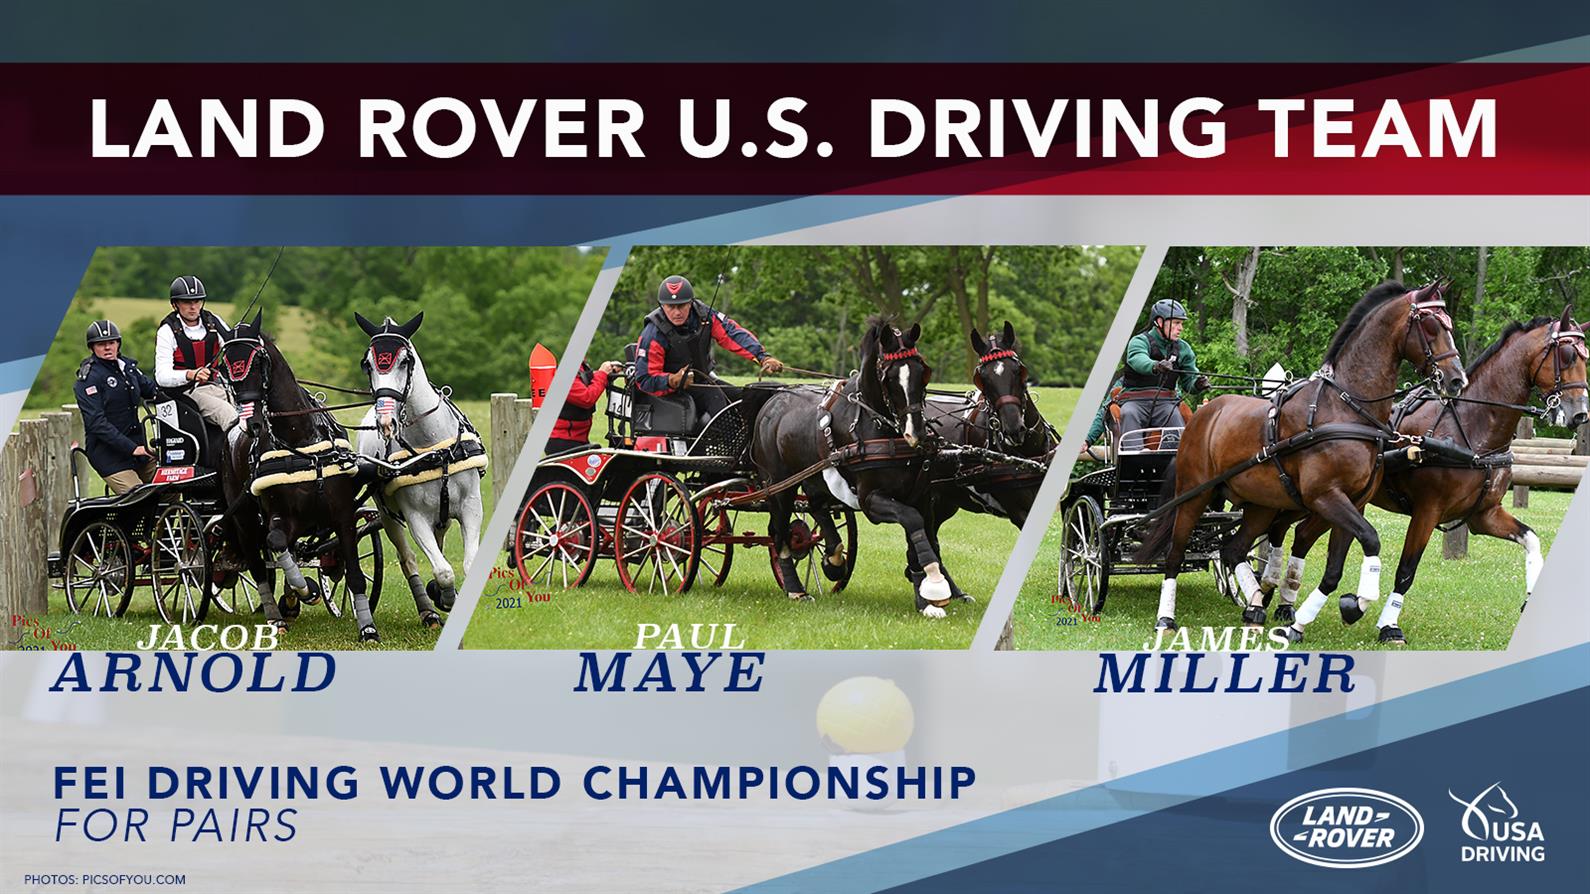 The U.S. team members for the 2021 FEI Driving World Championship for Pairs